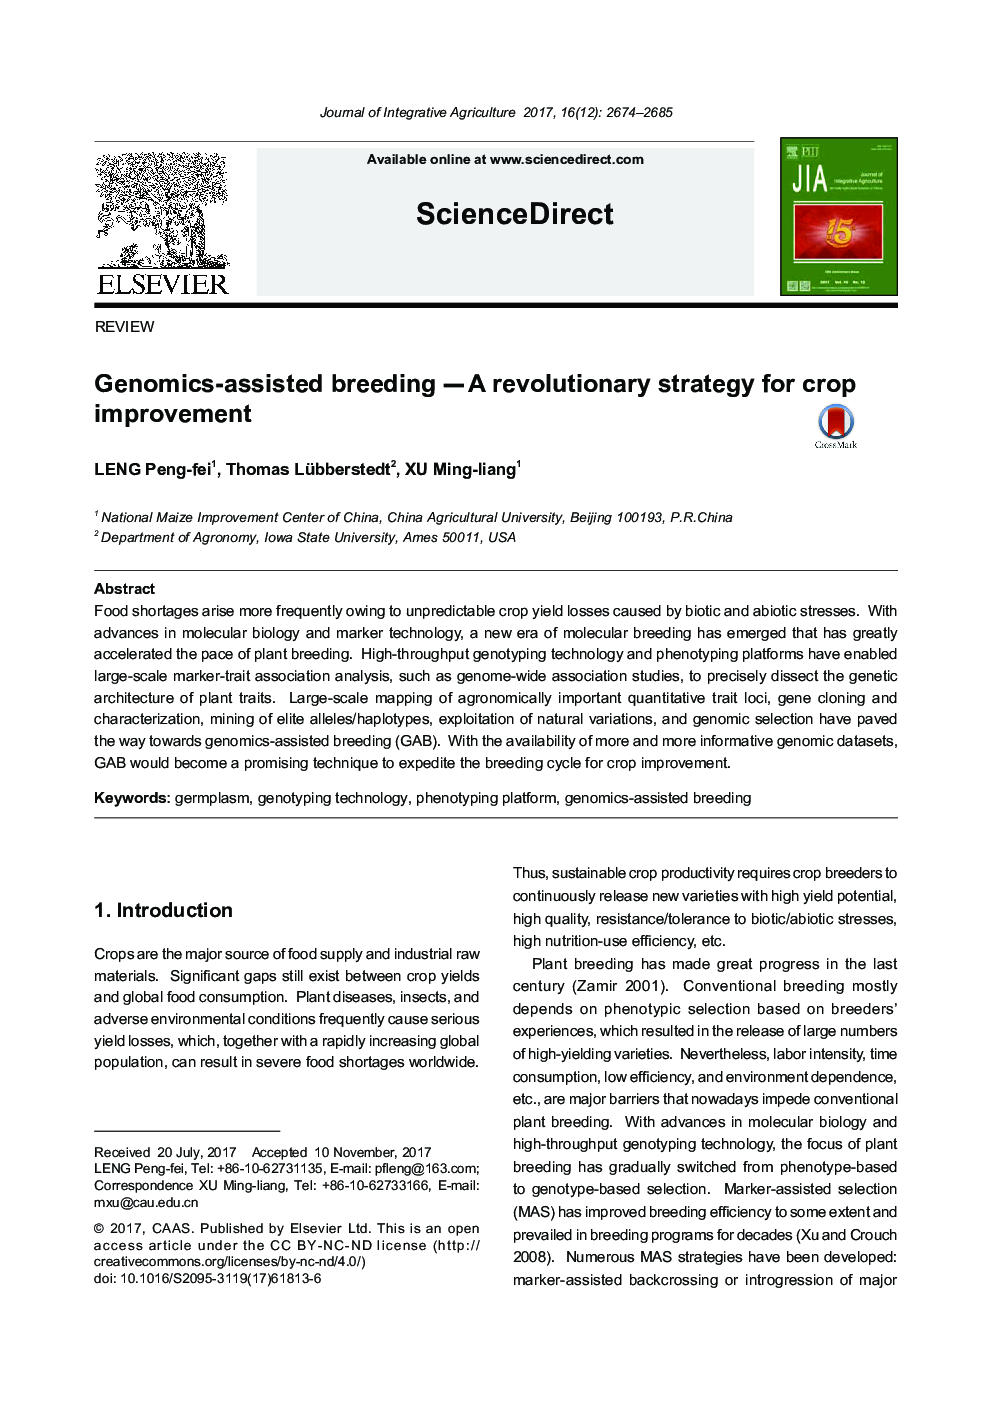 Genomics-assisted breeding - A revolutionary strategy for crop improvement